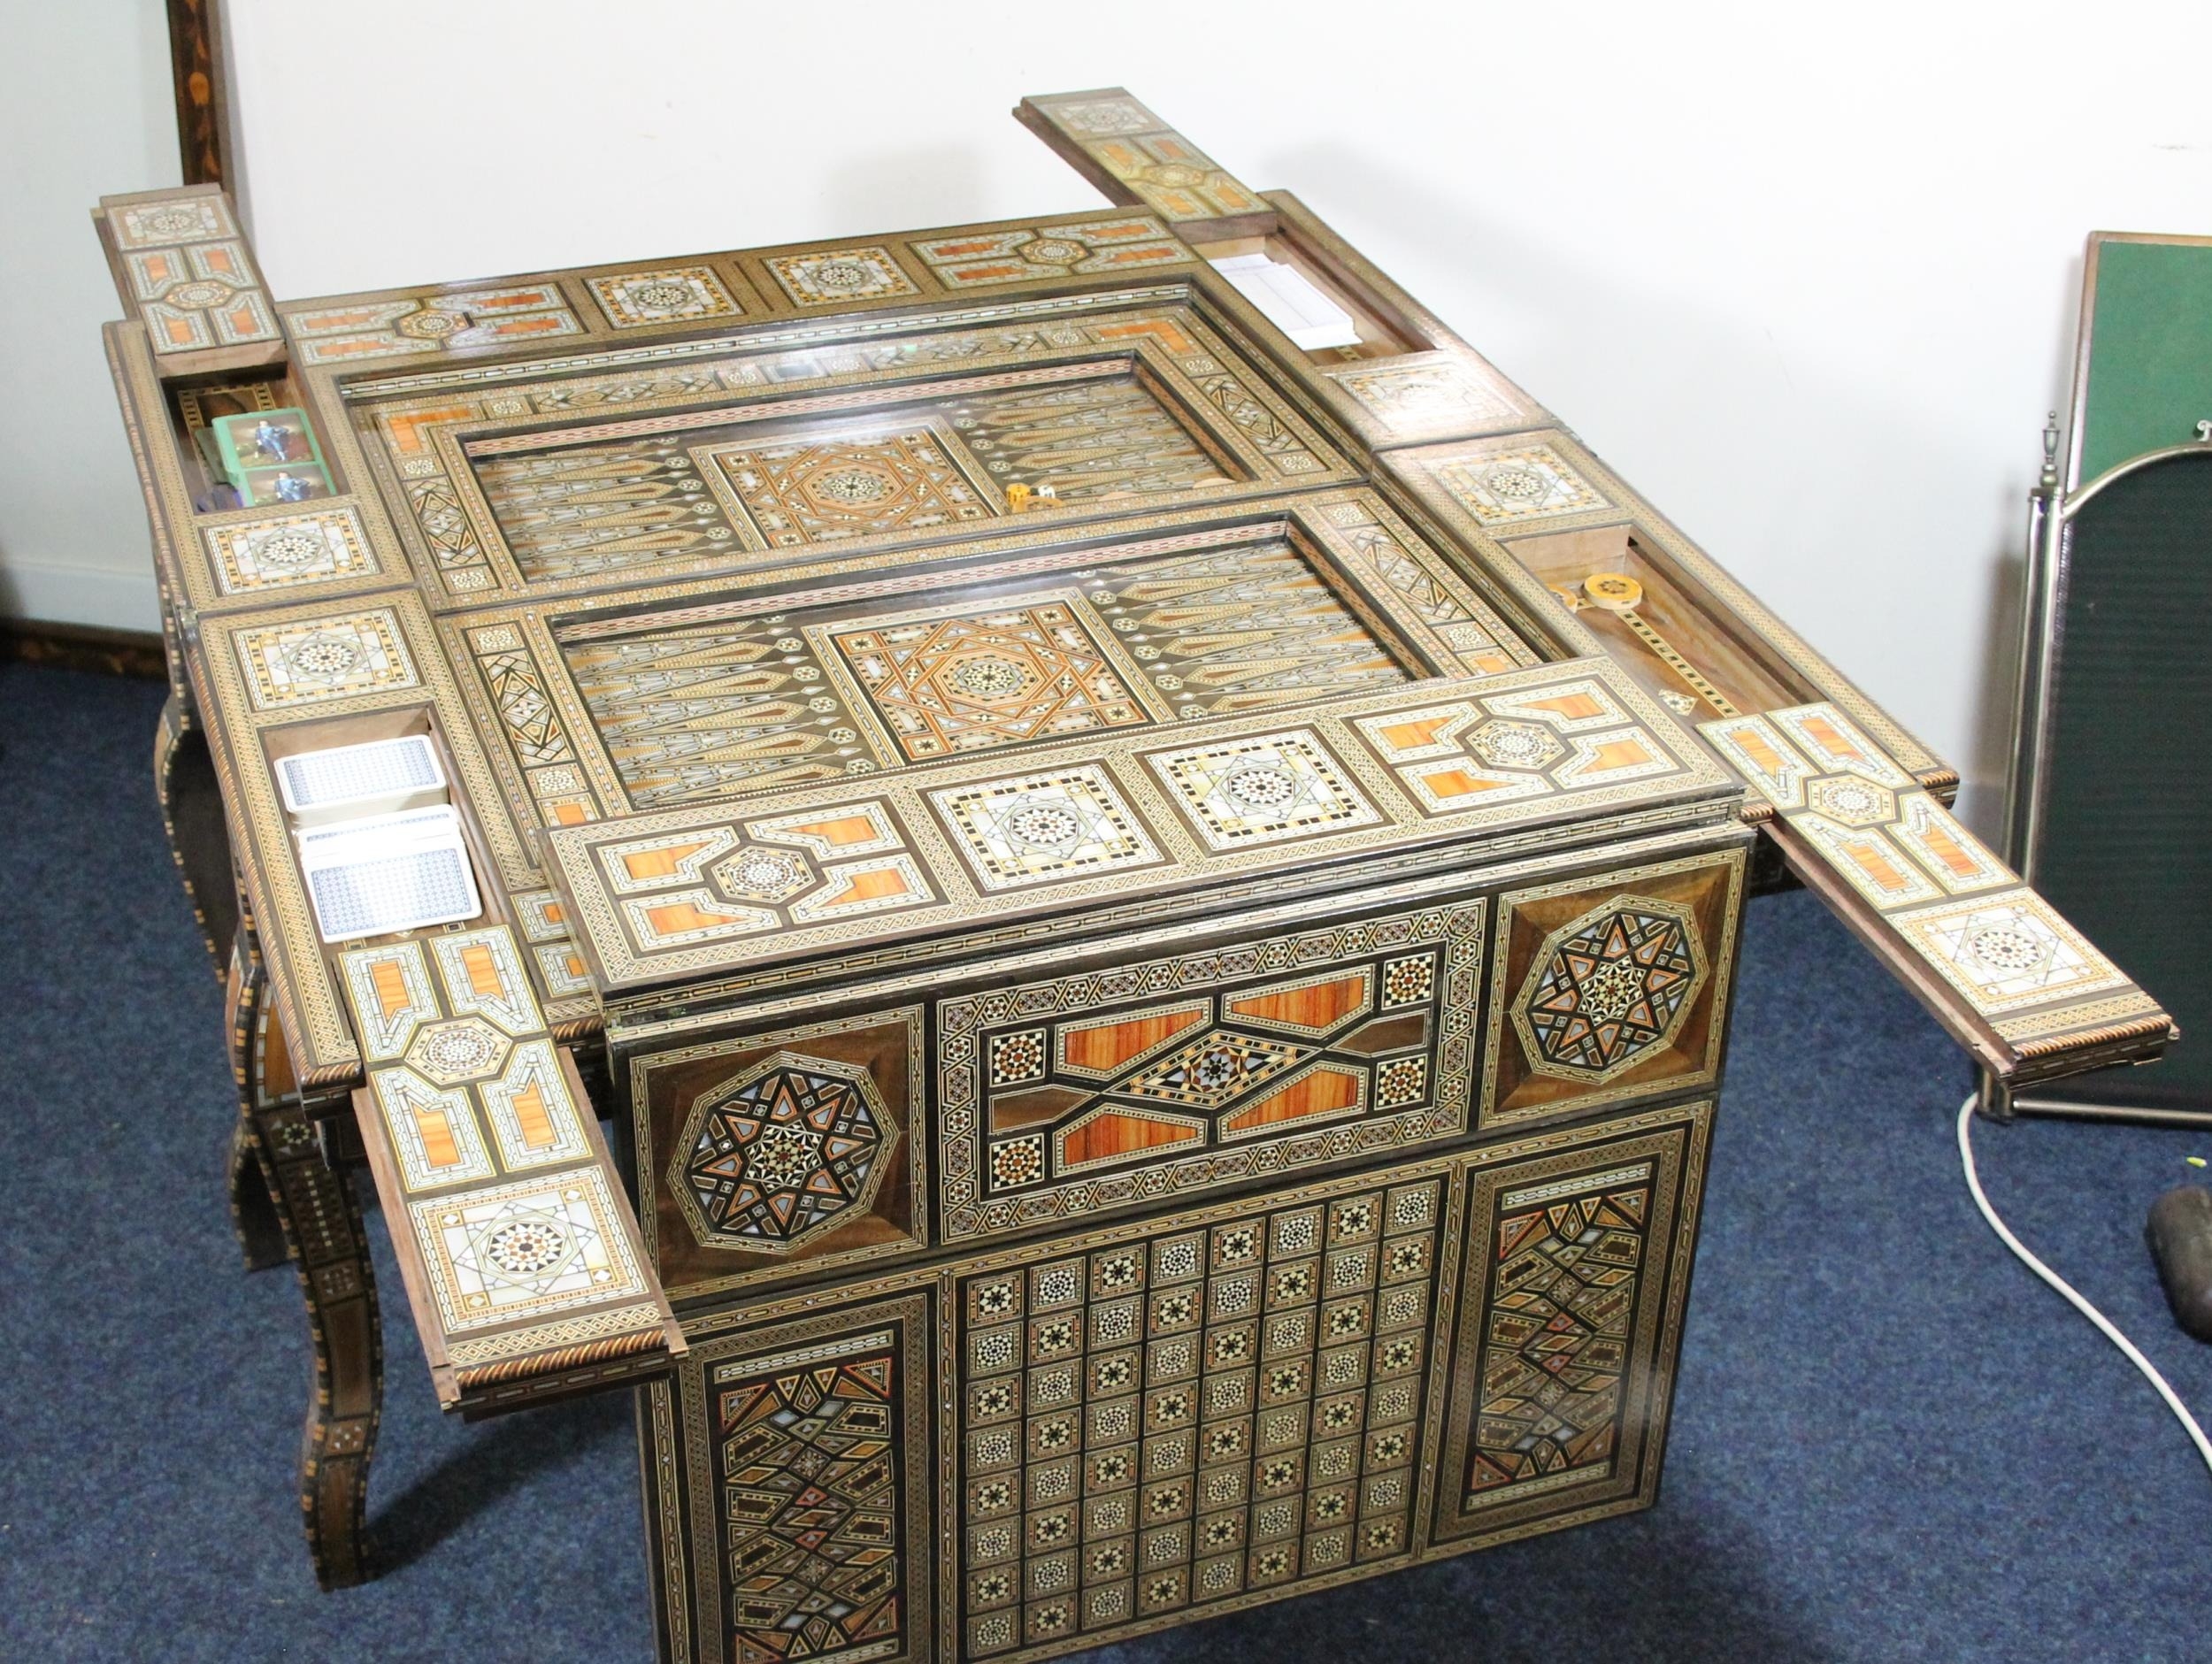 Syrian folding games table of Moorish design, mid 20th century, the elaborately inlaid mother of - Image 8 of 8